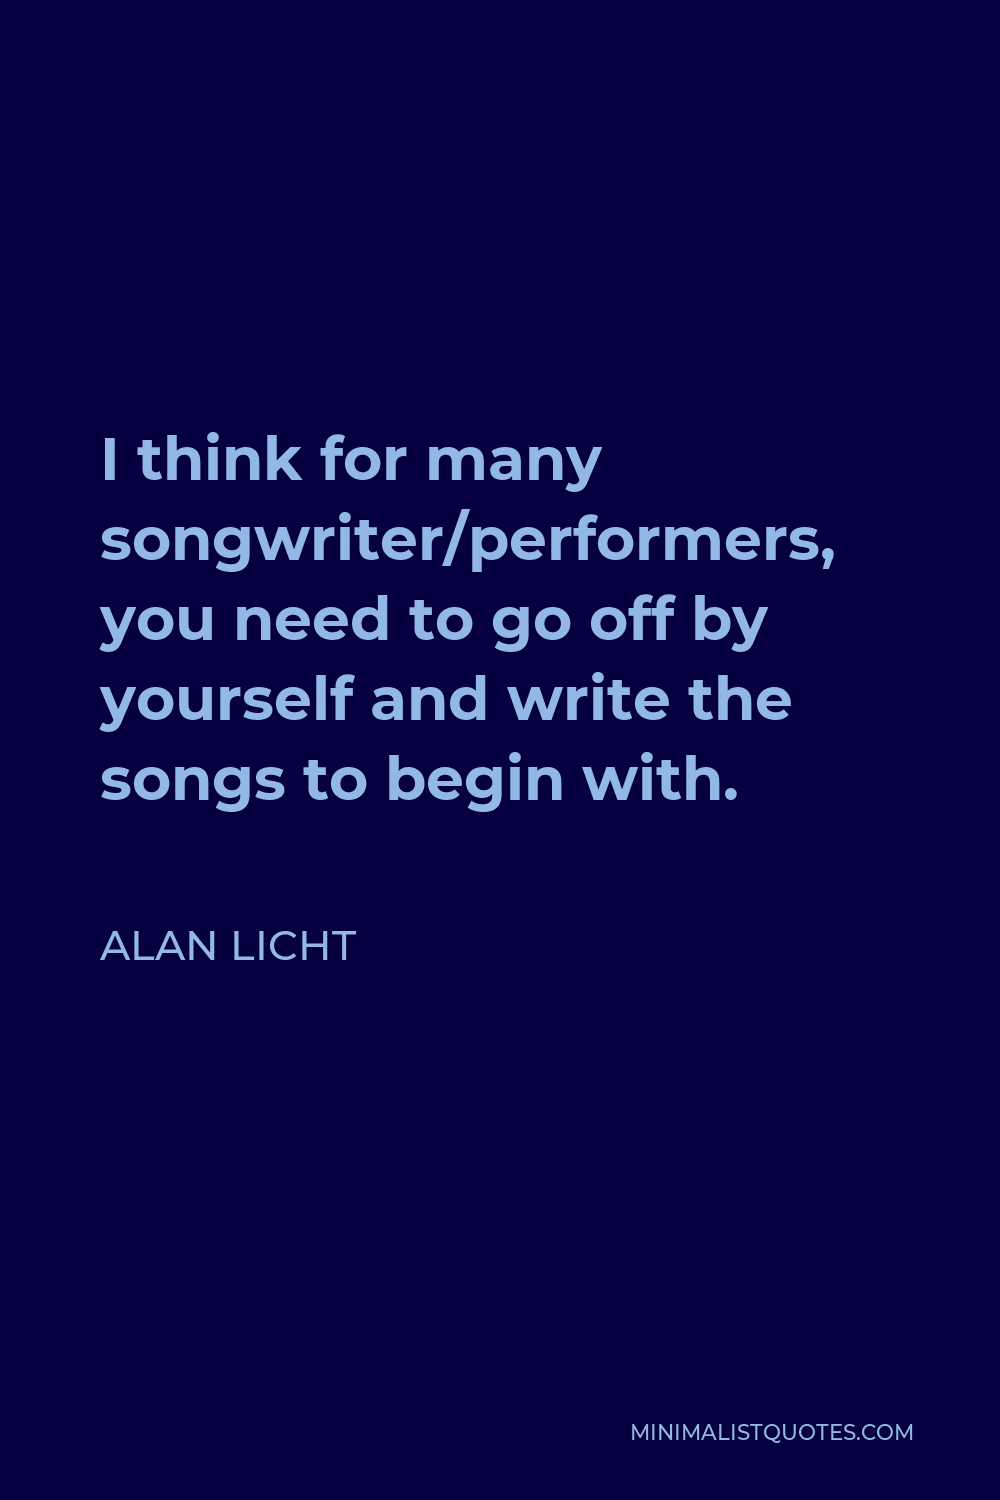 Alan Licht Quote - I think for many songwriter/performers, you need to go off by yourself and write the songs to begin with.